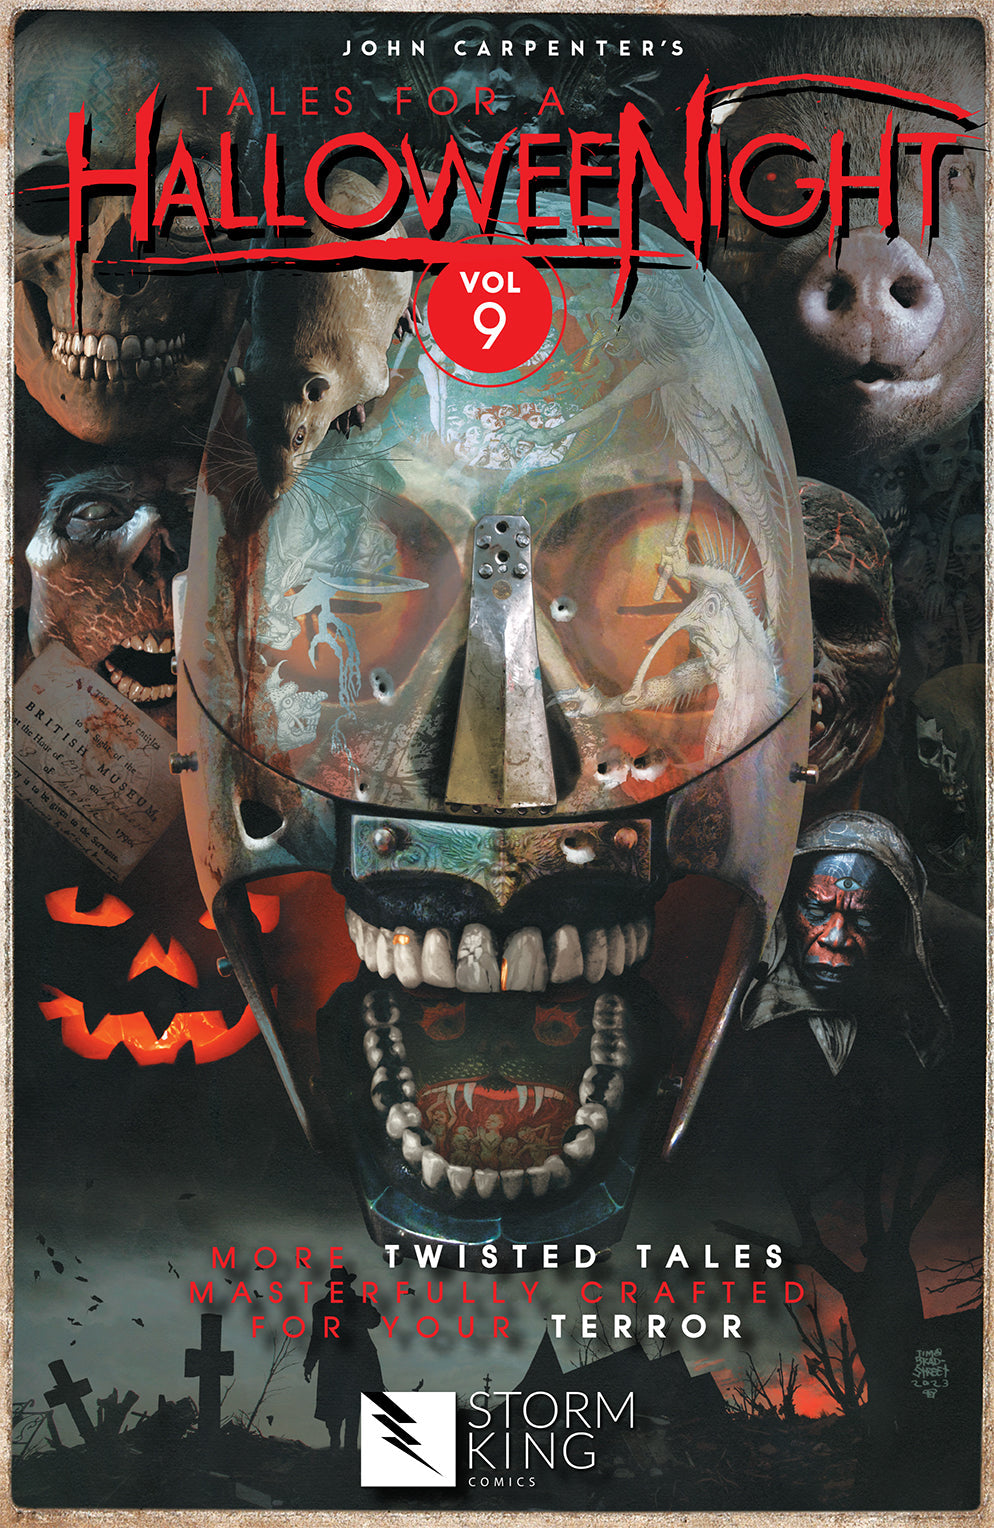 John Carpenter's Tales For A HalloweeNight Vol. 8  Coming SOON - Tales For  A HalloweeNight Vol. 8 From the mind of John Carpenter, the man who brought  you the classic horror